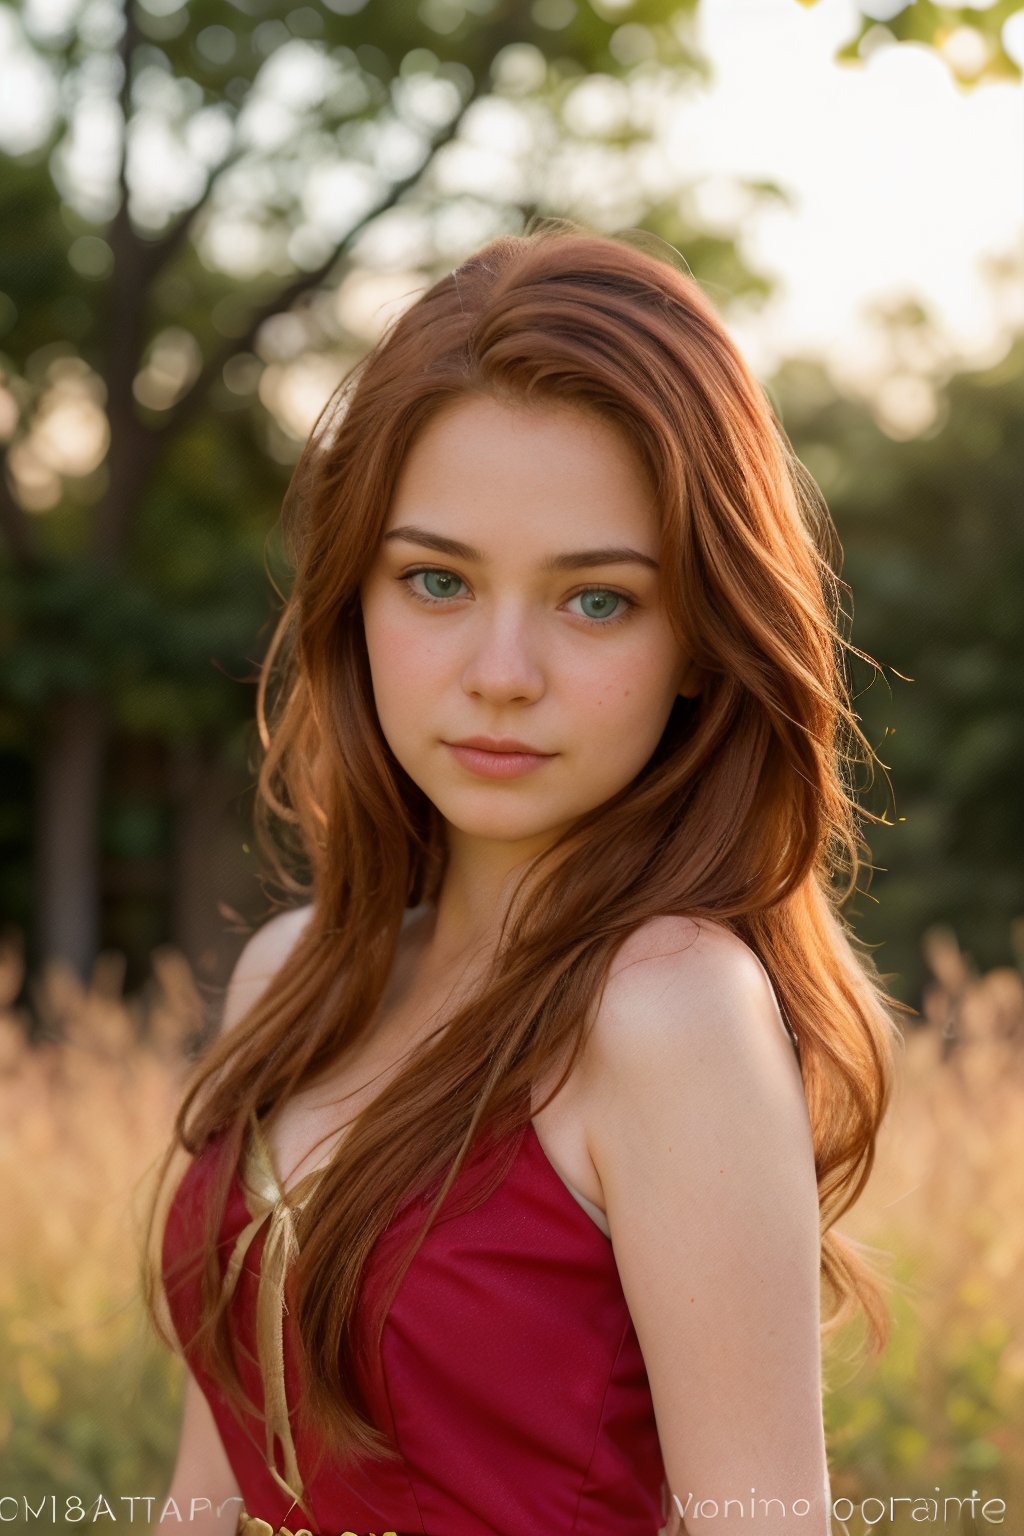 Realistic portrait of a woman with flowing auburn hair, wearing a crimson dress that complements her green eyes. She stands against a backdrop of soft, golden evening sunlight, casting a gentle warmth on her features. mt-christy